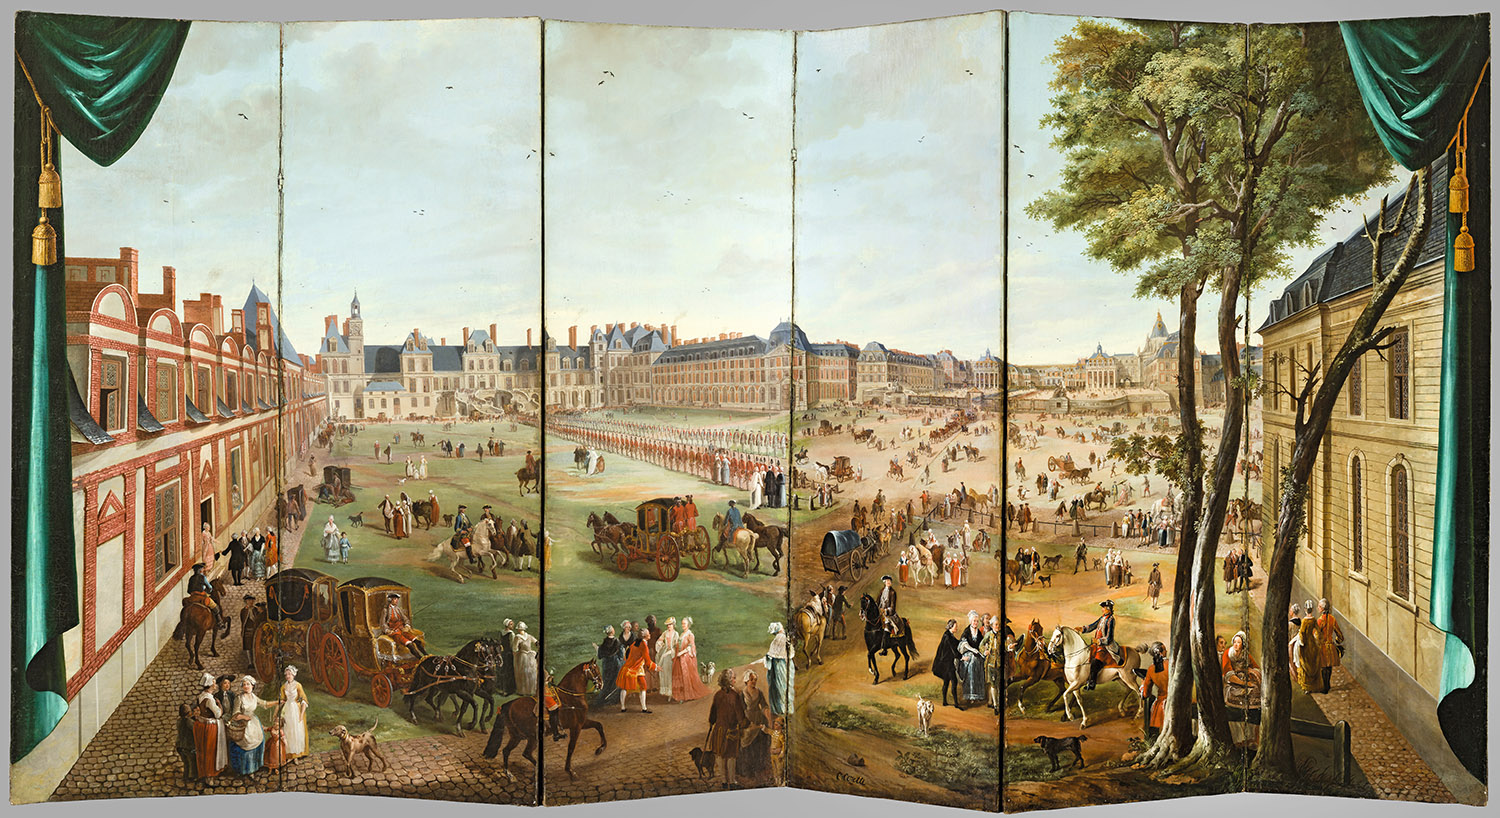 Folding Screen with Views of the Chateau de Versailles_Detail_300dpi